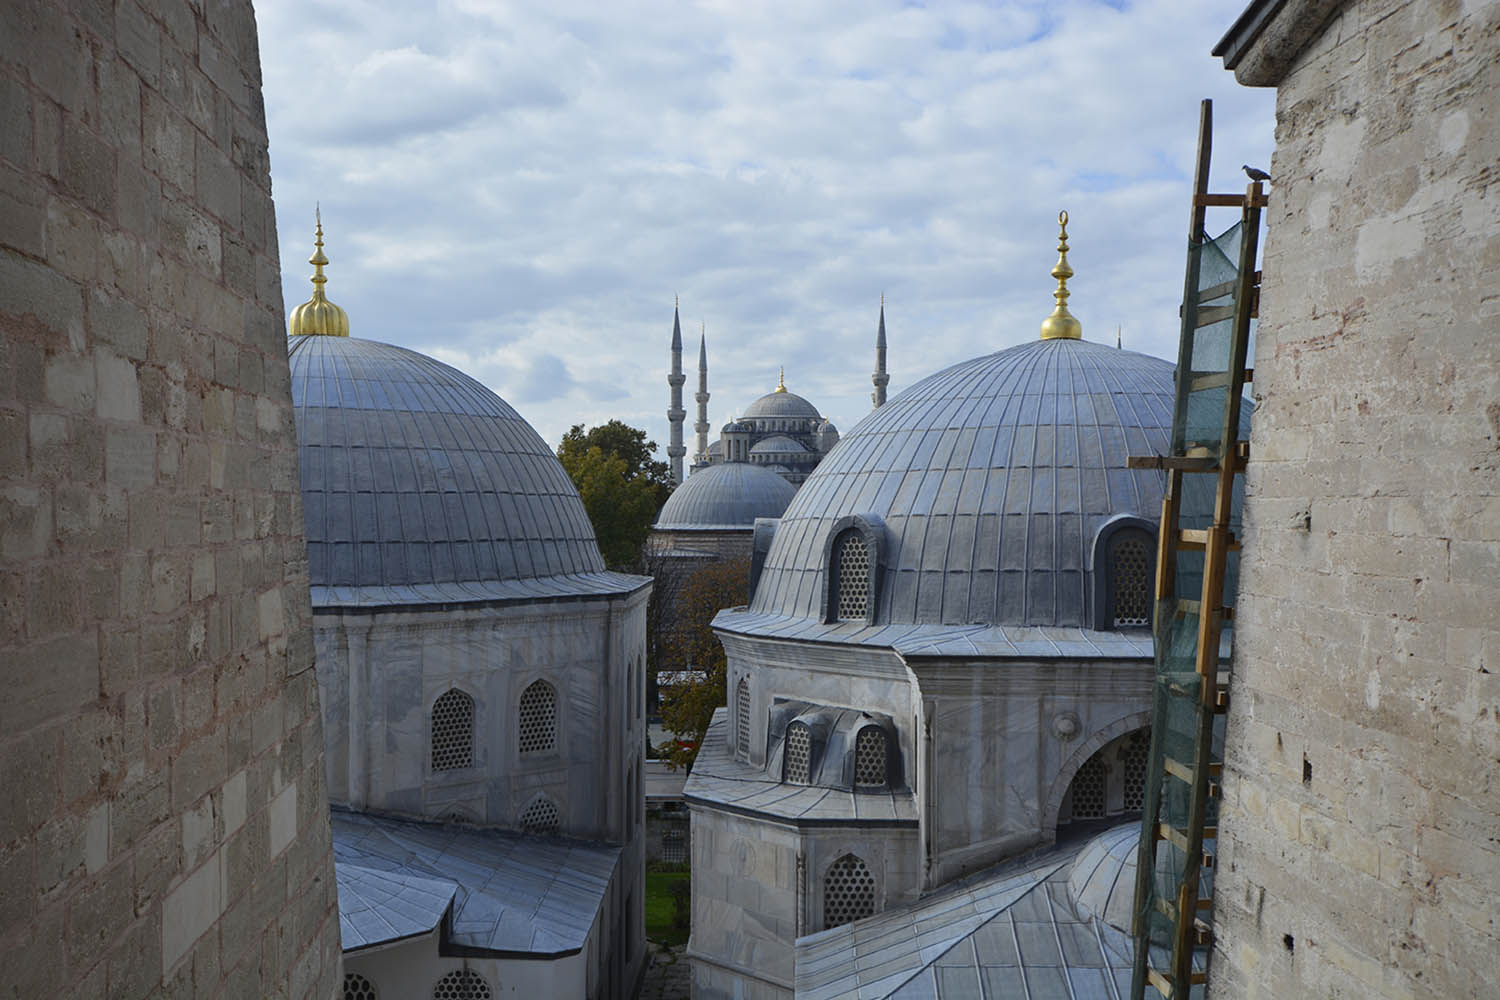 View of the Sultanahmet Camii from the upper floor of Aya Sofya, overlooking the latter's domes and finials.